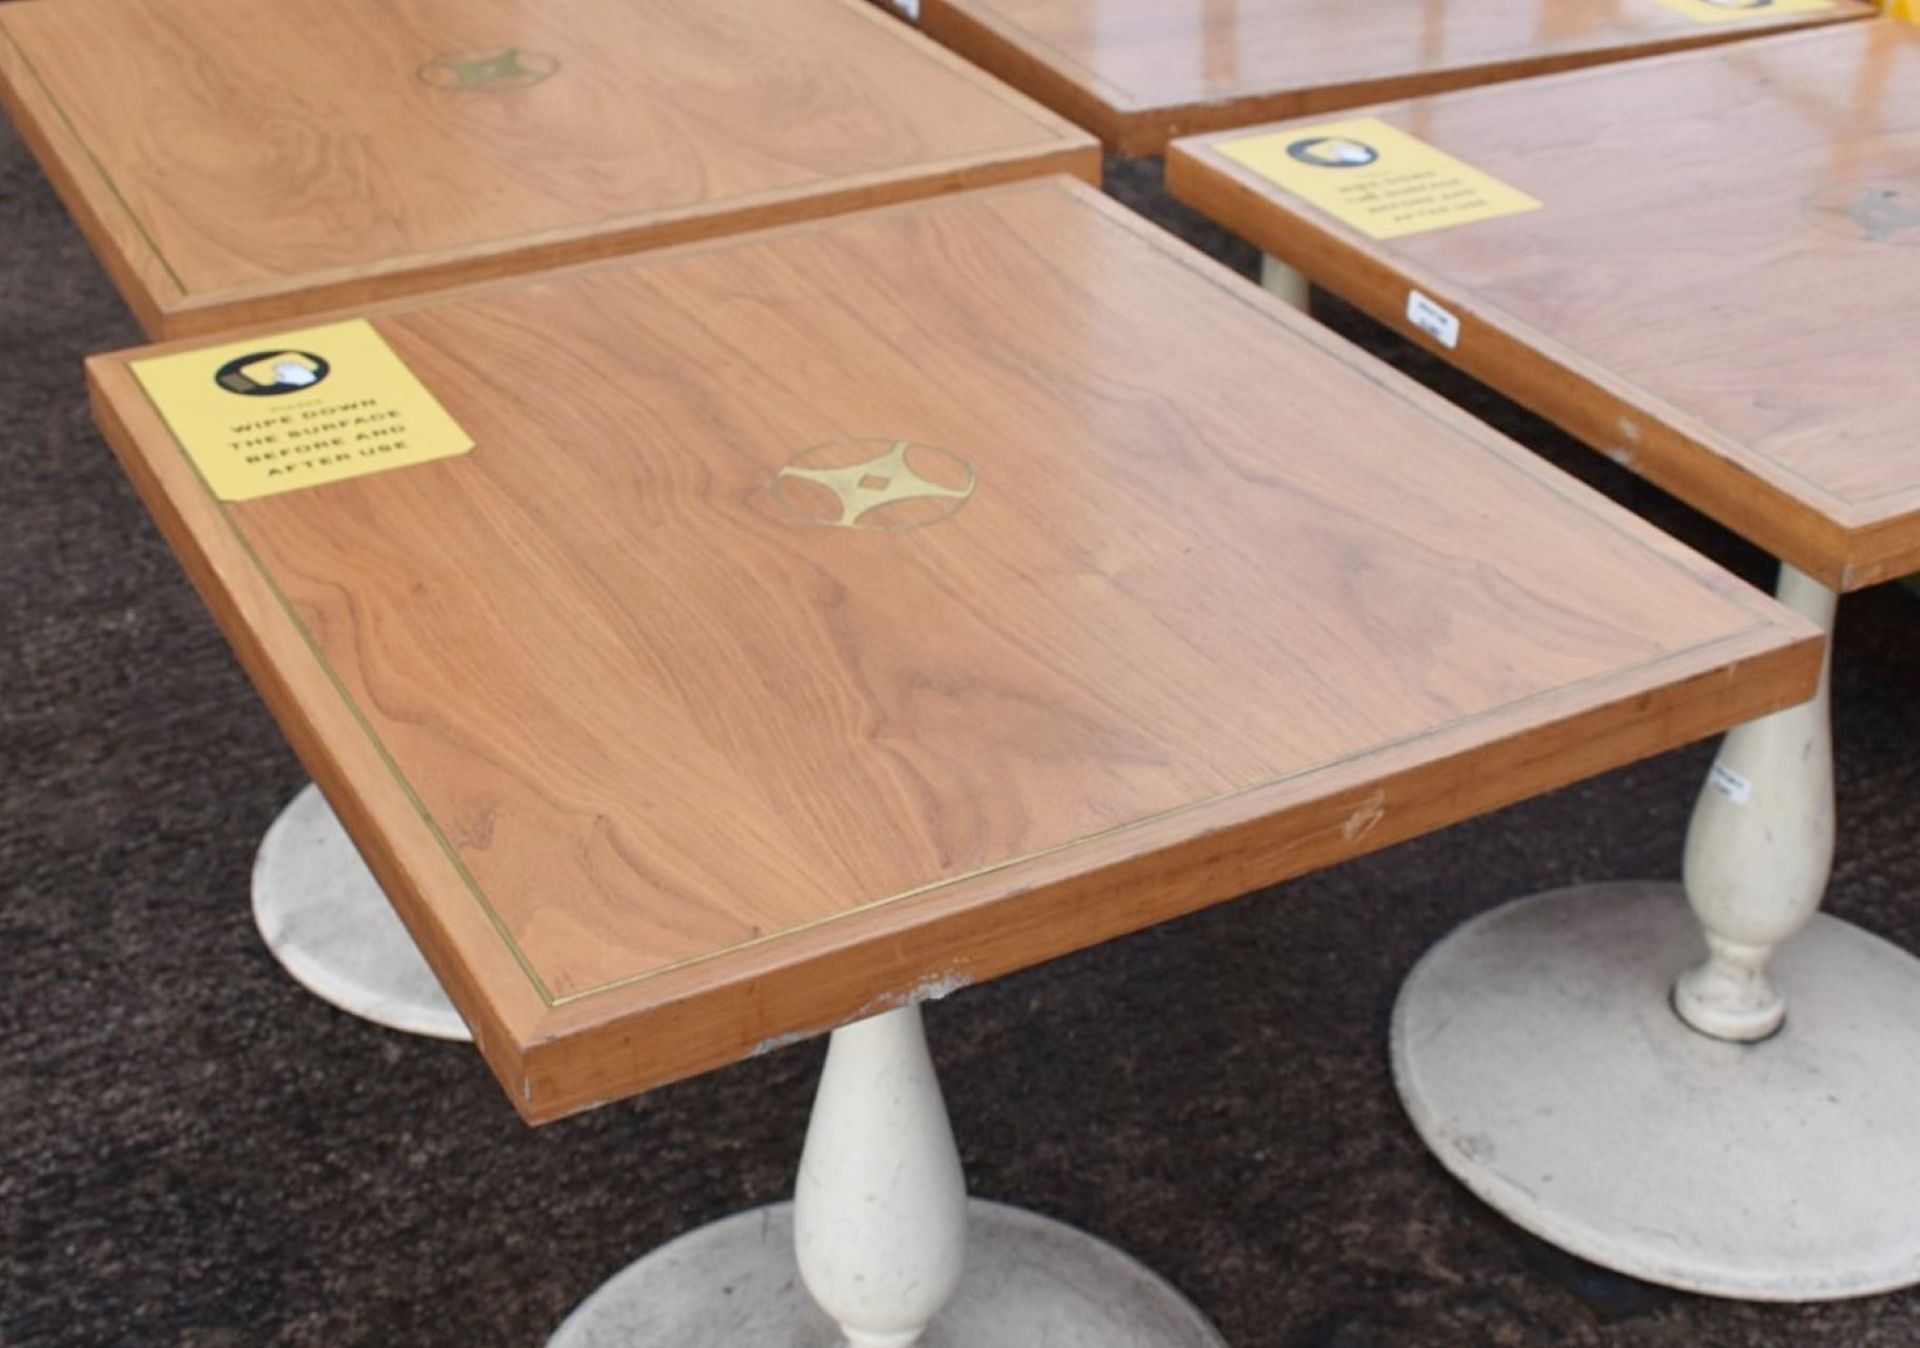 4 x Wooden Topped Bistro Tables Featuring Inlaid Brass Work And Sturdy Metal Bases - Image 7 of 7